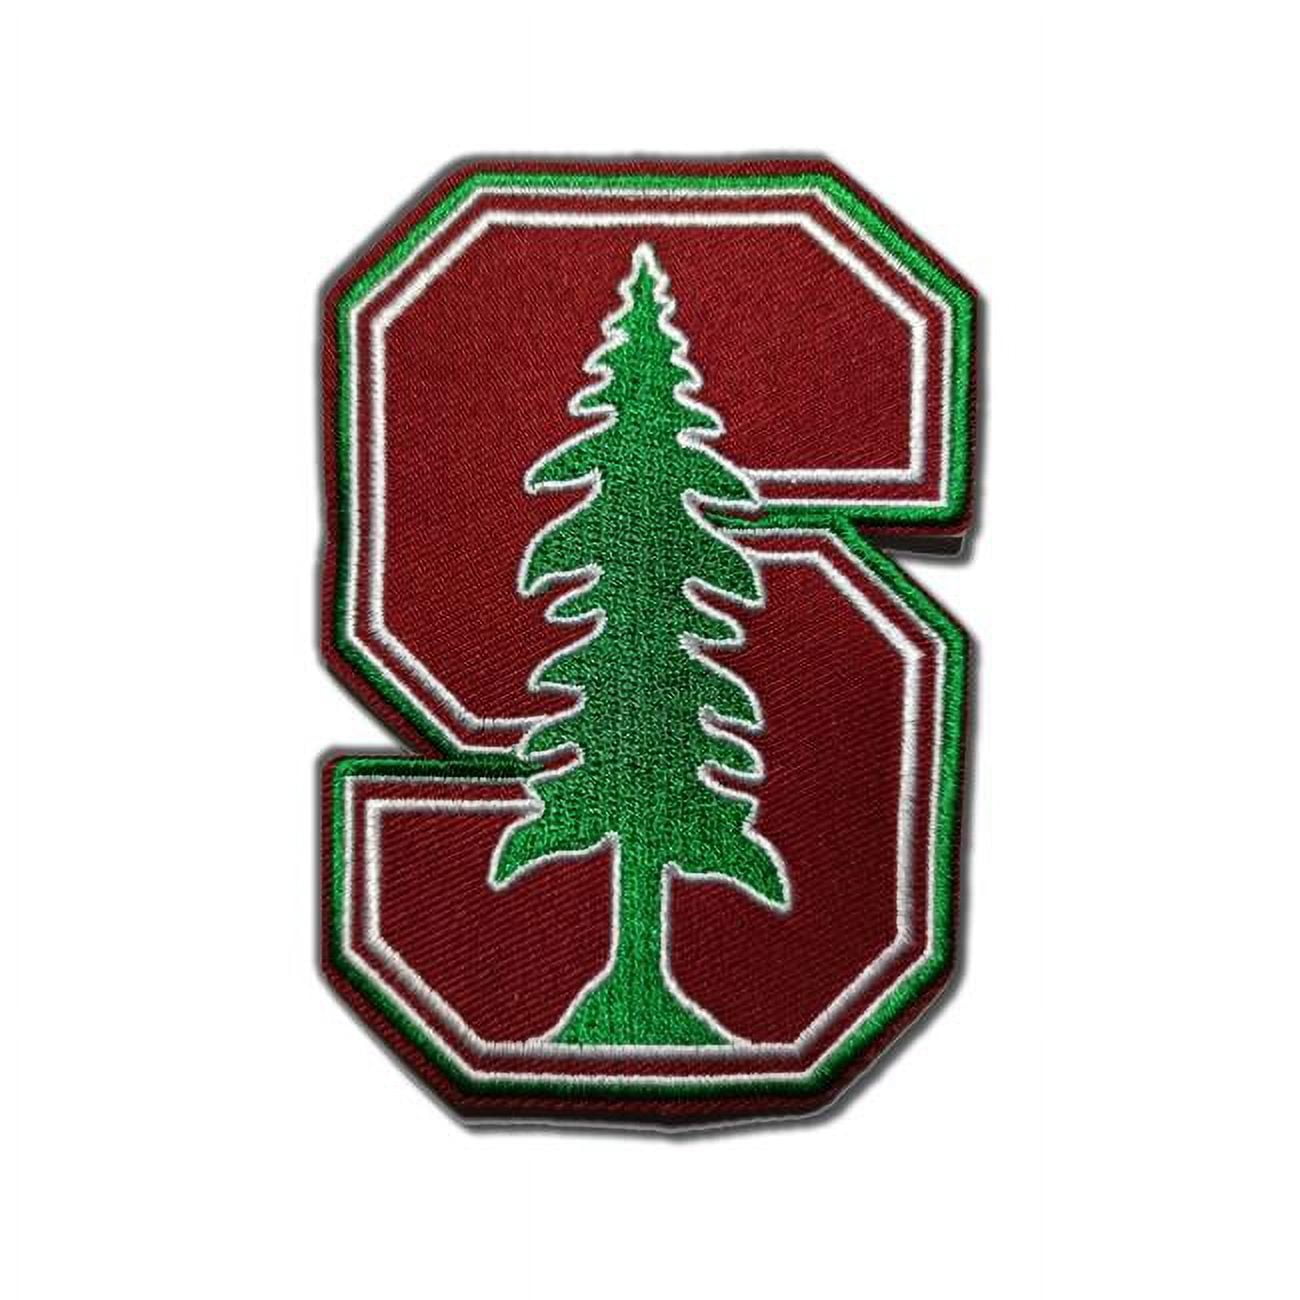 New NFL San Francisco 49ers Football Logo embroidered iron on patch. (i174)